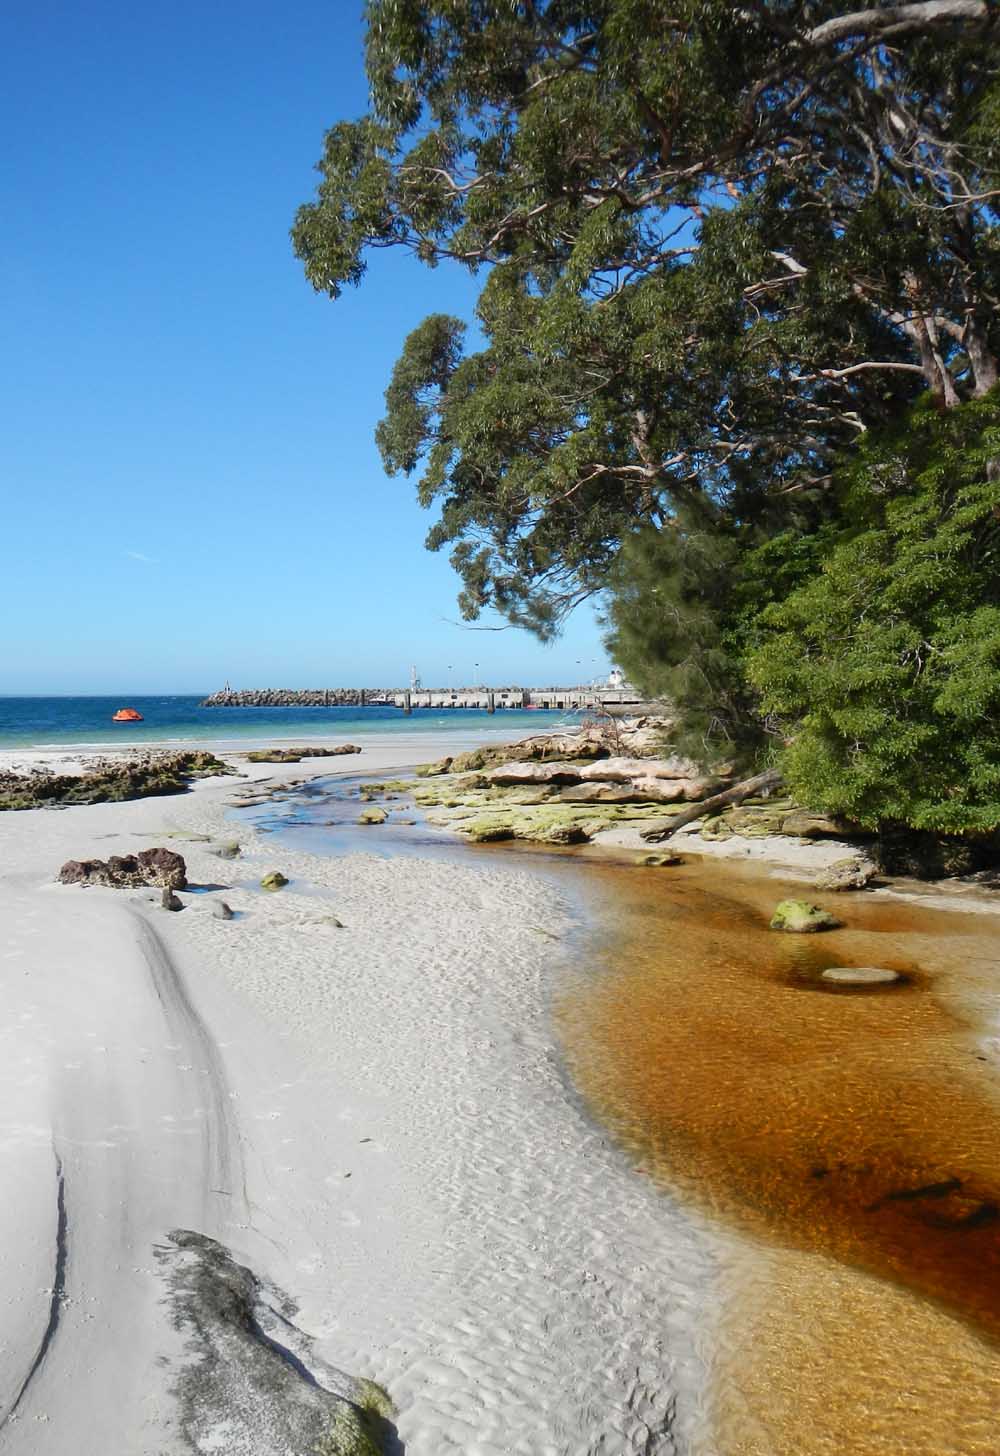 The well-photographed creek separating HMAS Creswell from Hyams Beach. Photo credit M. Jenner